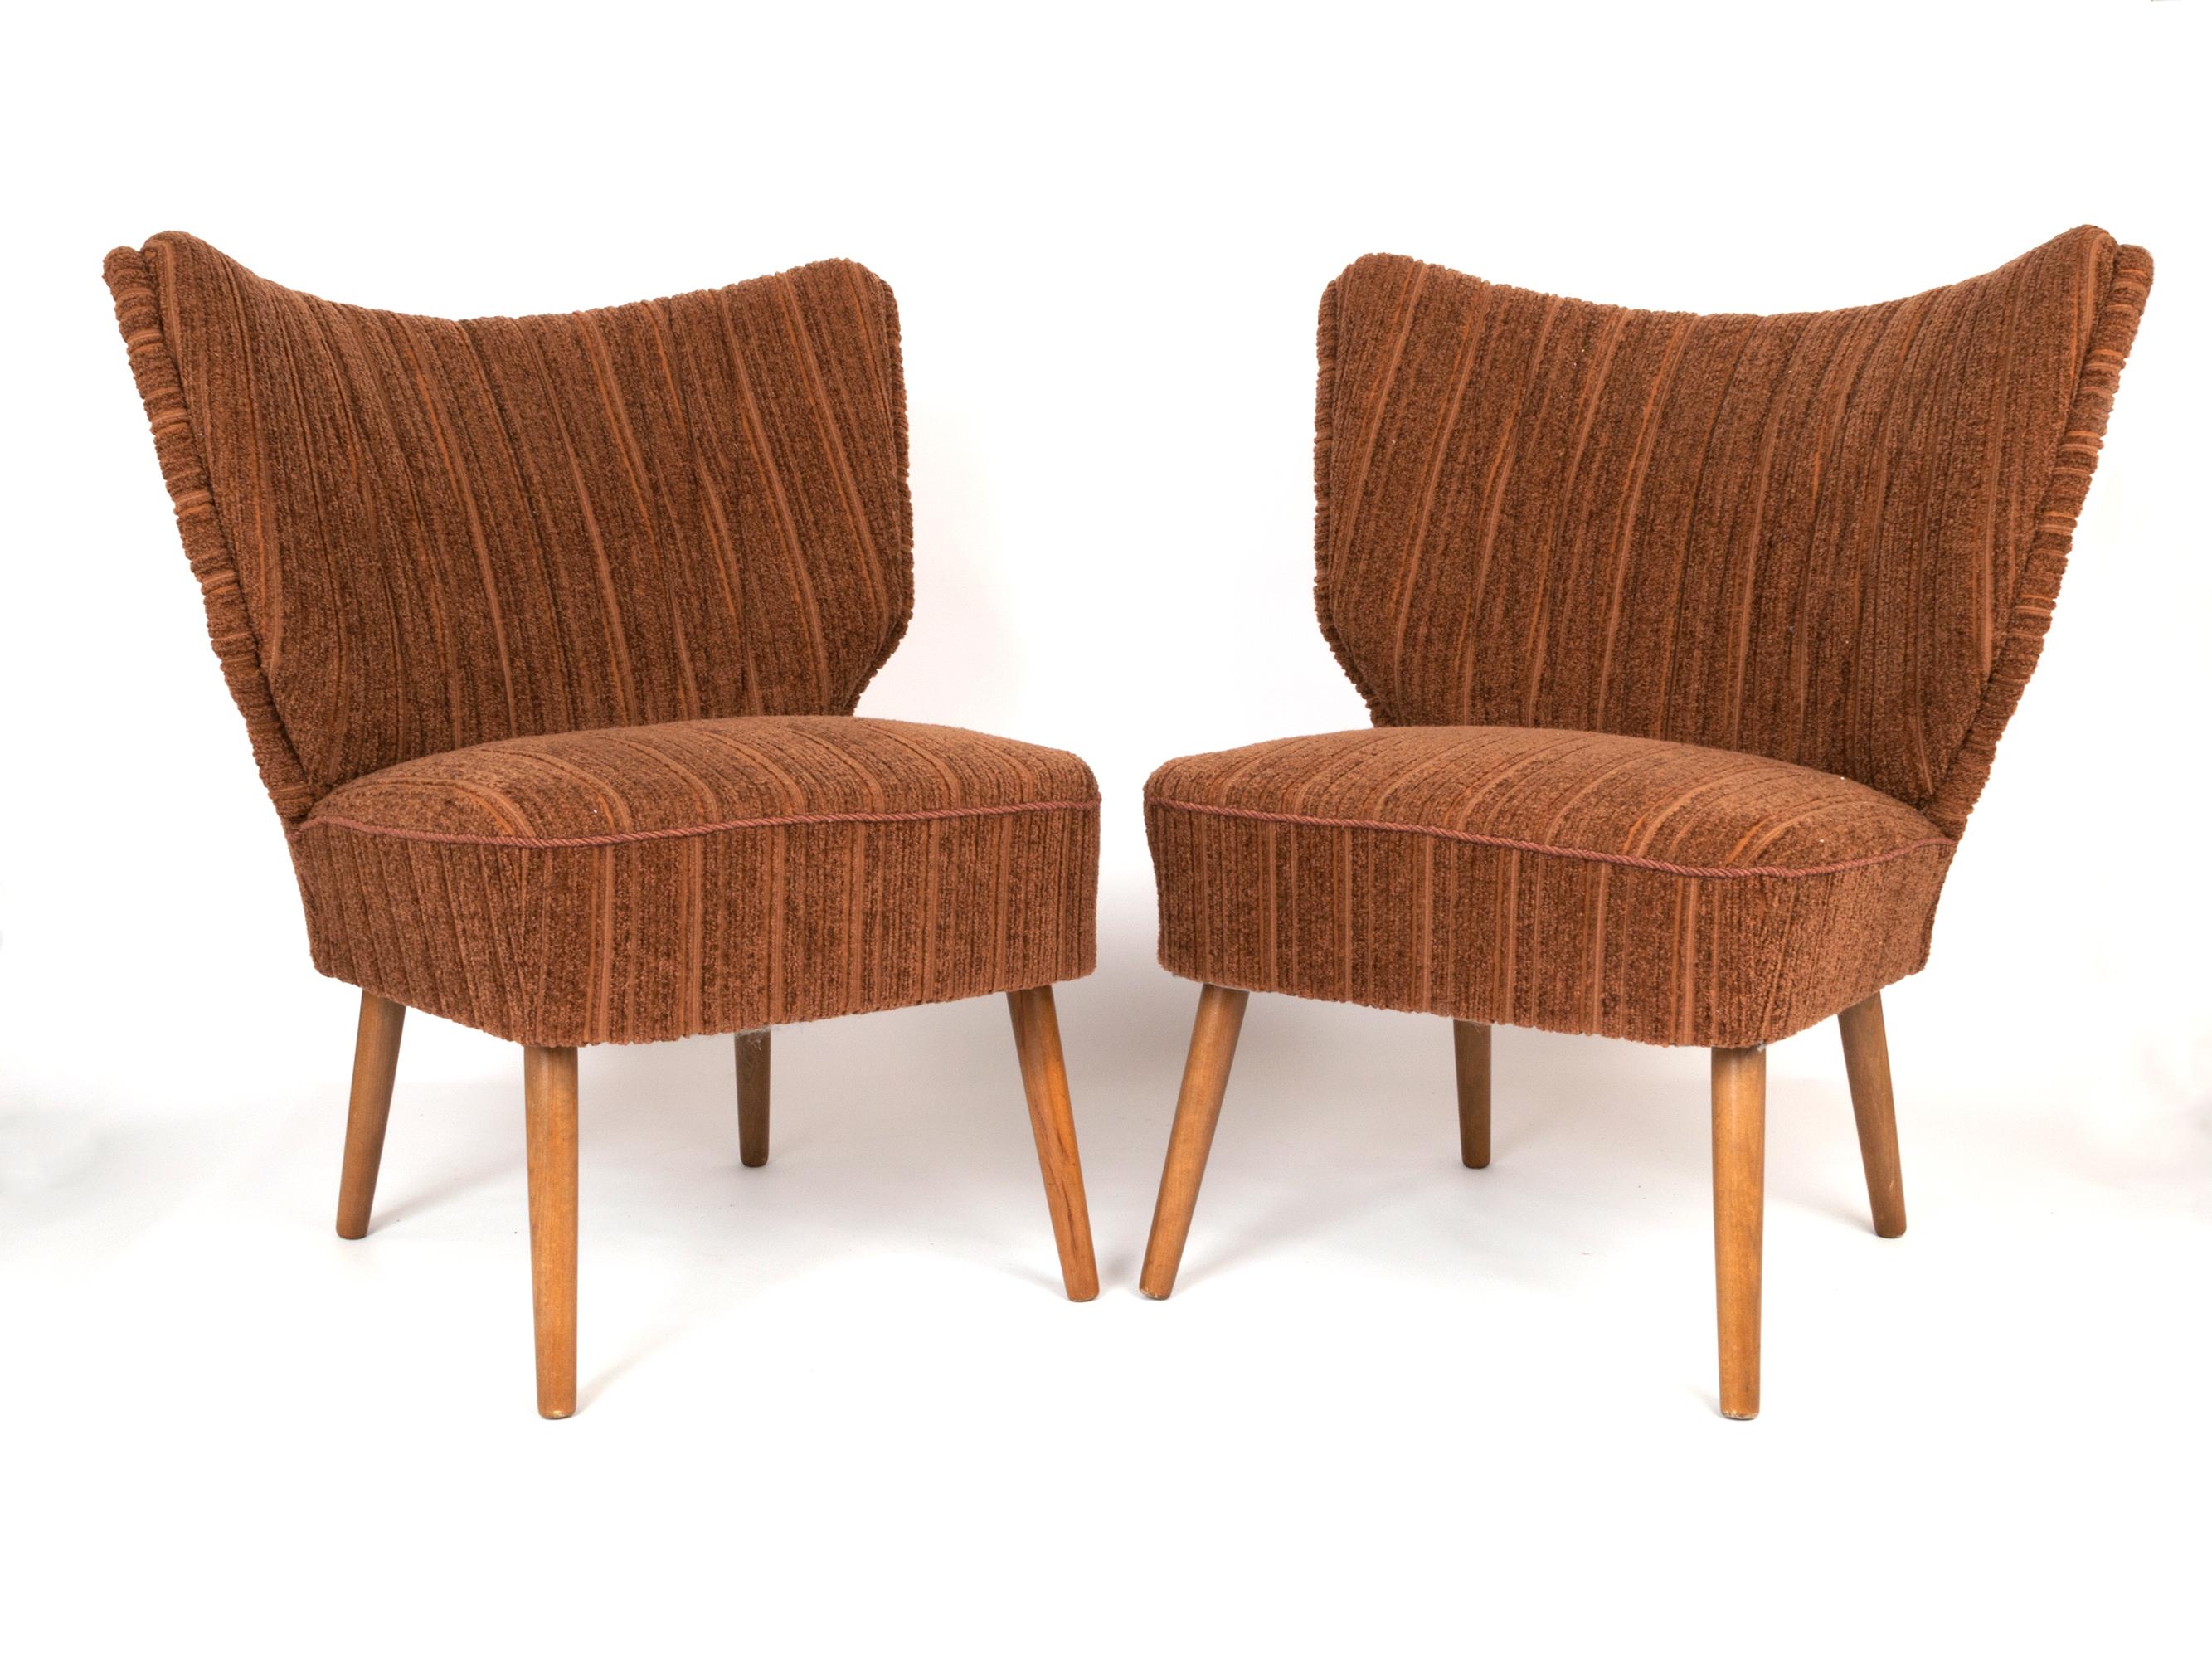 Pair of Danish Cocktail Lounge Chairs, C.1950 For Sale 2